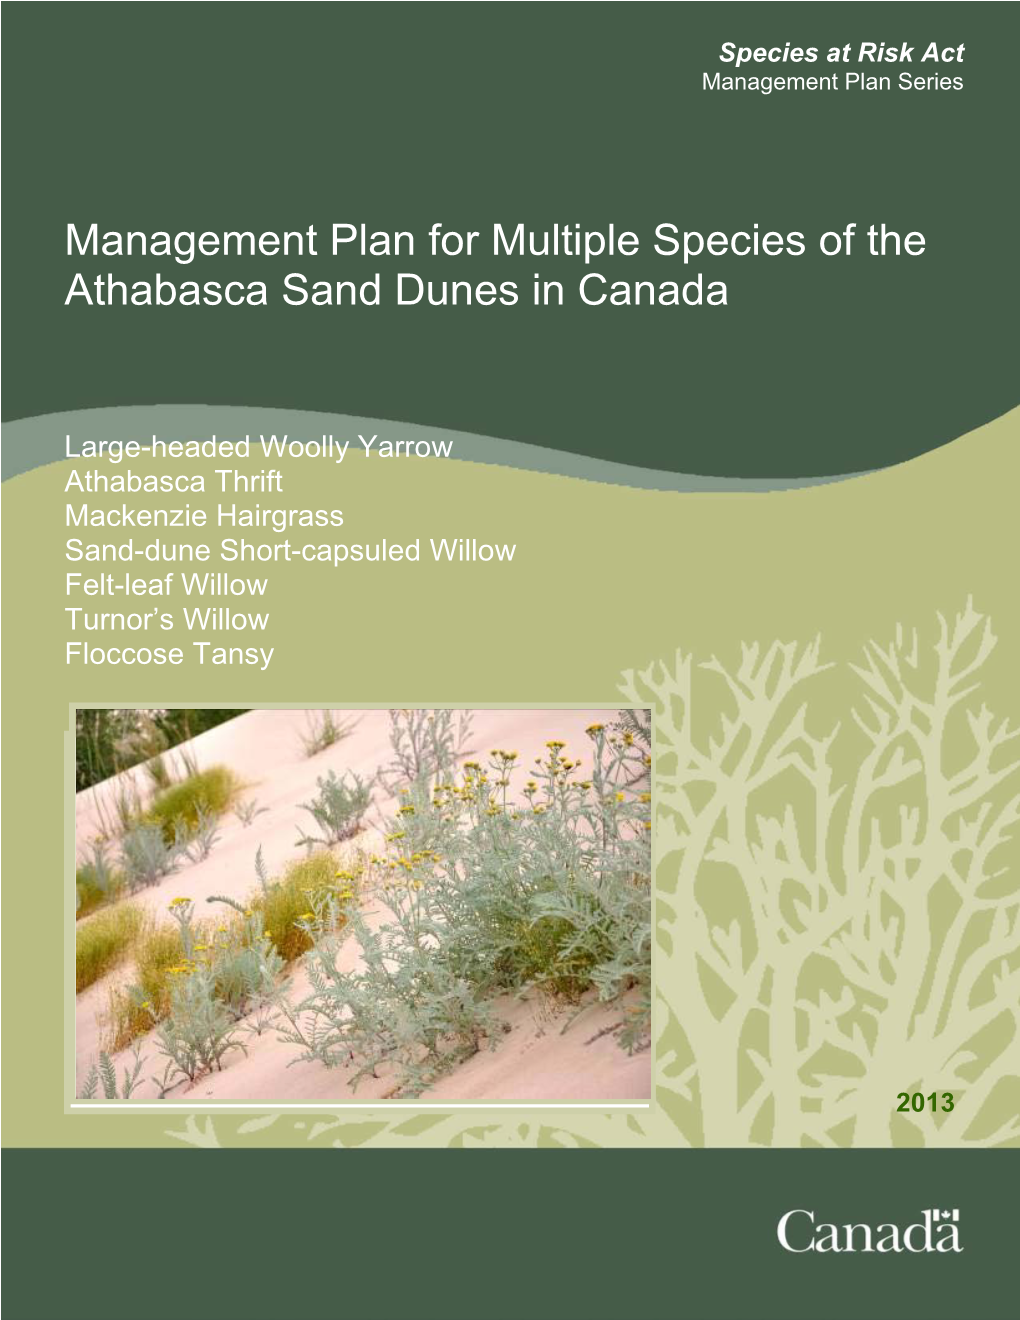 Athabasca Thrift Mackenzie Hairgrass Sand-Dune Short-Capsuled Willow Felt-Leaf Willow Turnor’S Willow Floccose Tansy